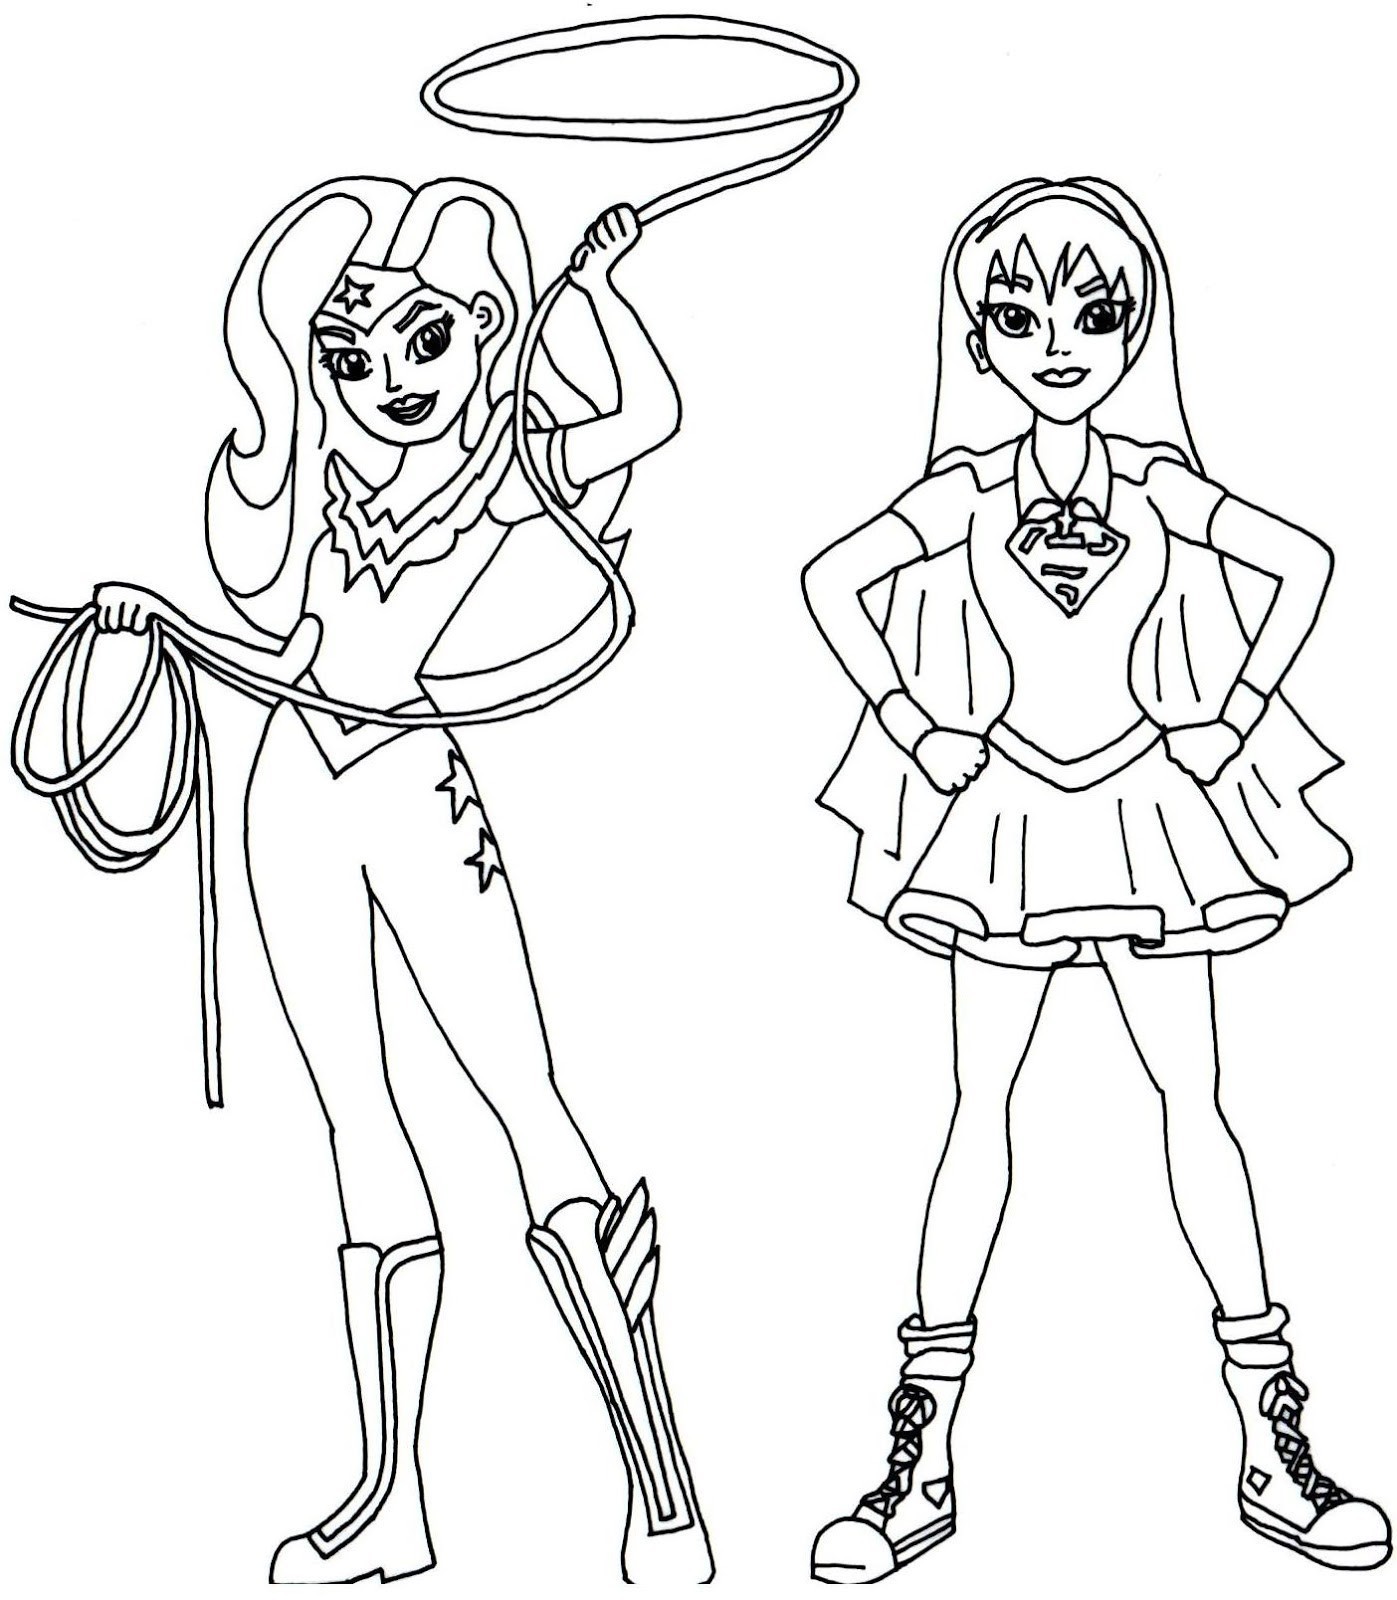 dc-superhero-girls-coloring-pages-best-coloring-pages-for-kids